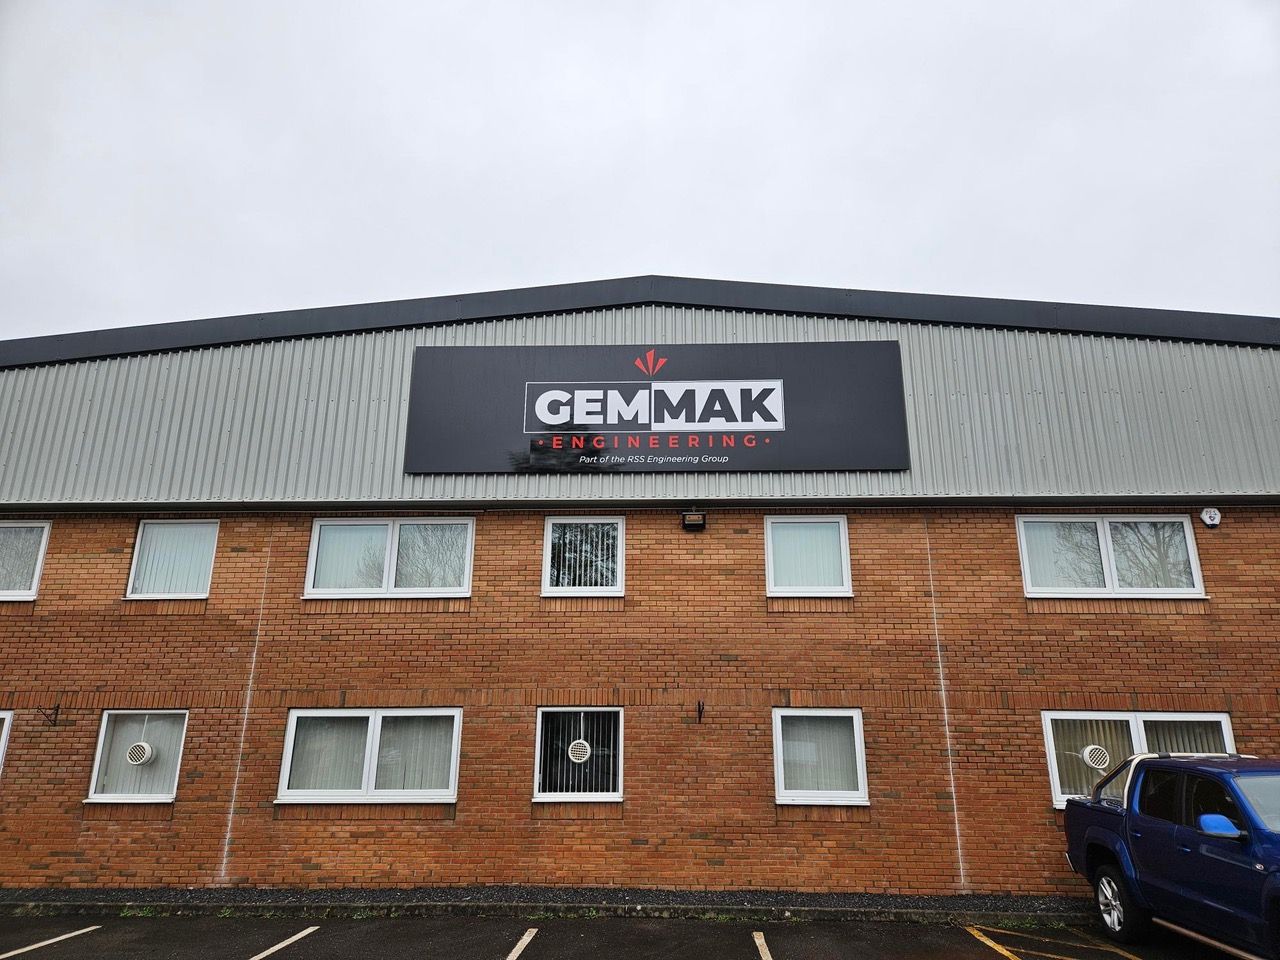 Rope and Sling Specialists Ltd. has relocated its Gemmak Engineering Ltd. manufacturing and engineering services department to a new facility in Swansea, Wales.